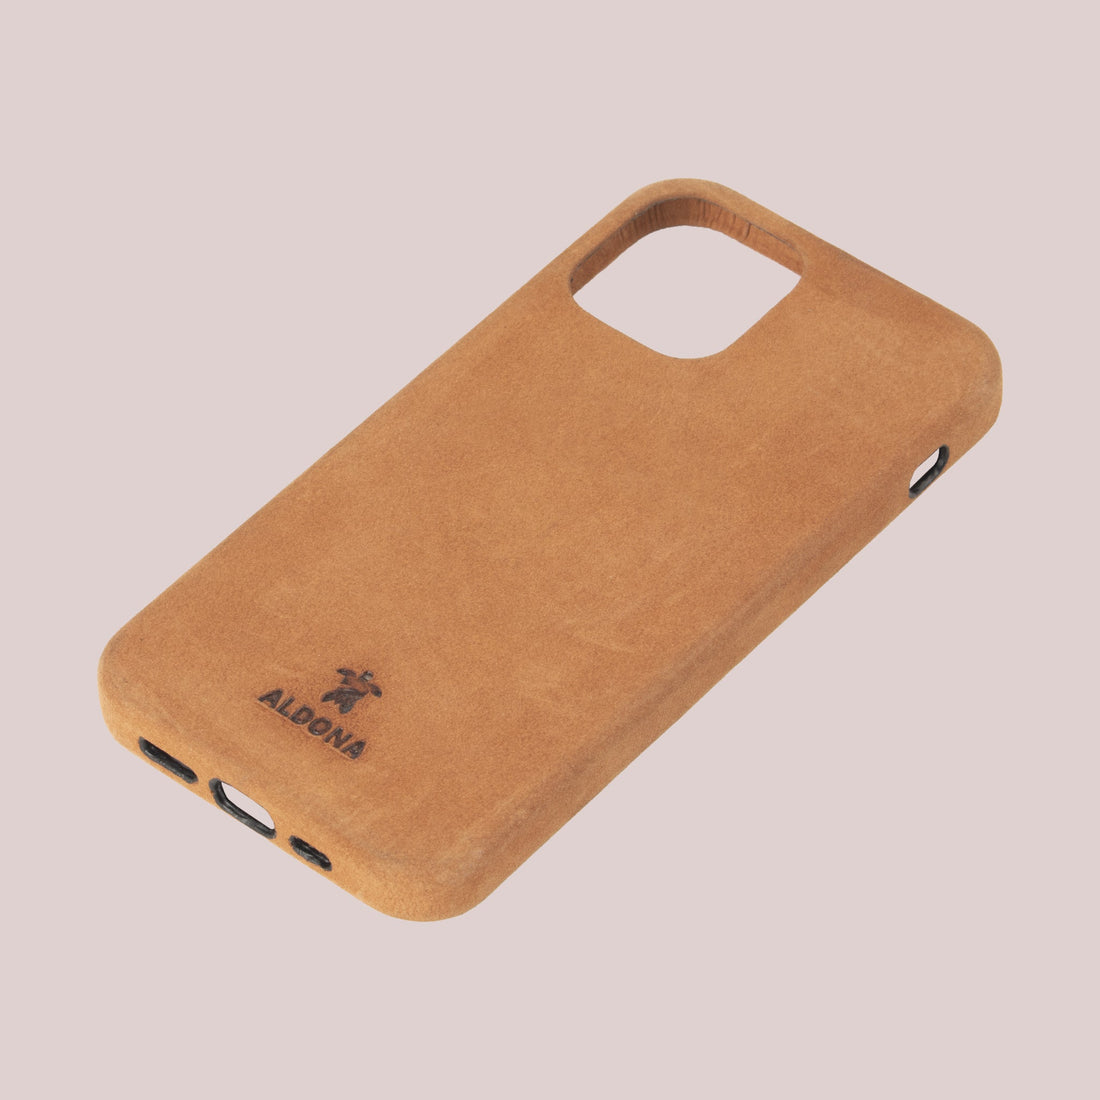 Kalon Case for iPhone 12 with MagSafe Compatibility - Vintage Tan